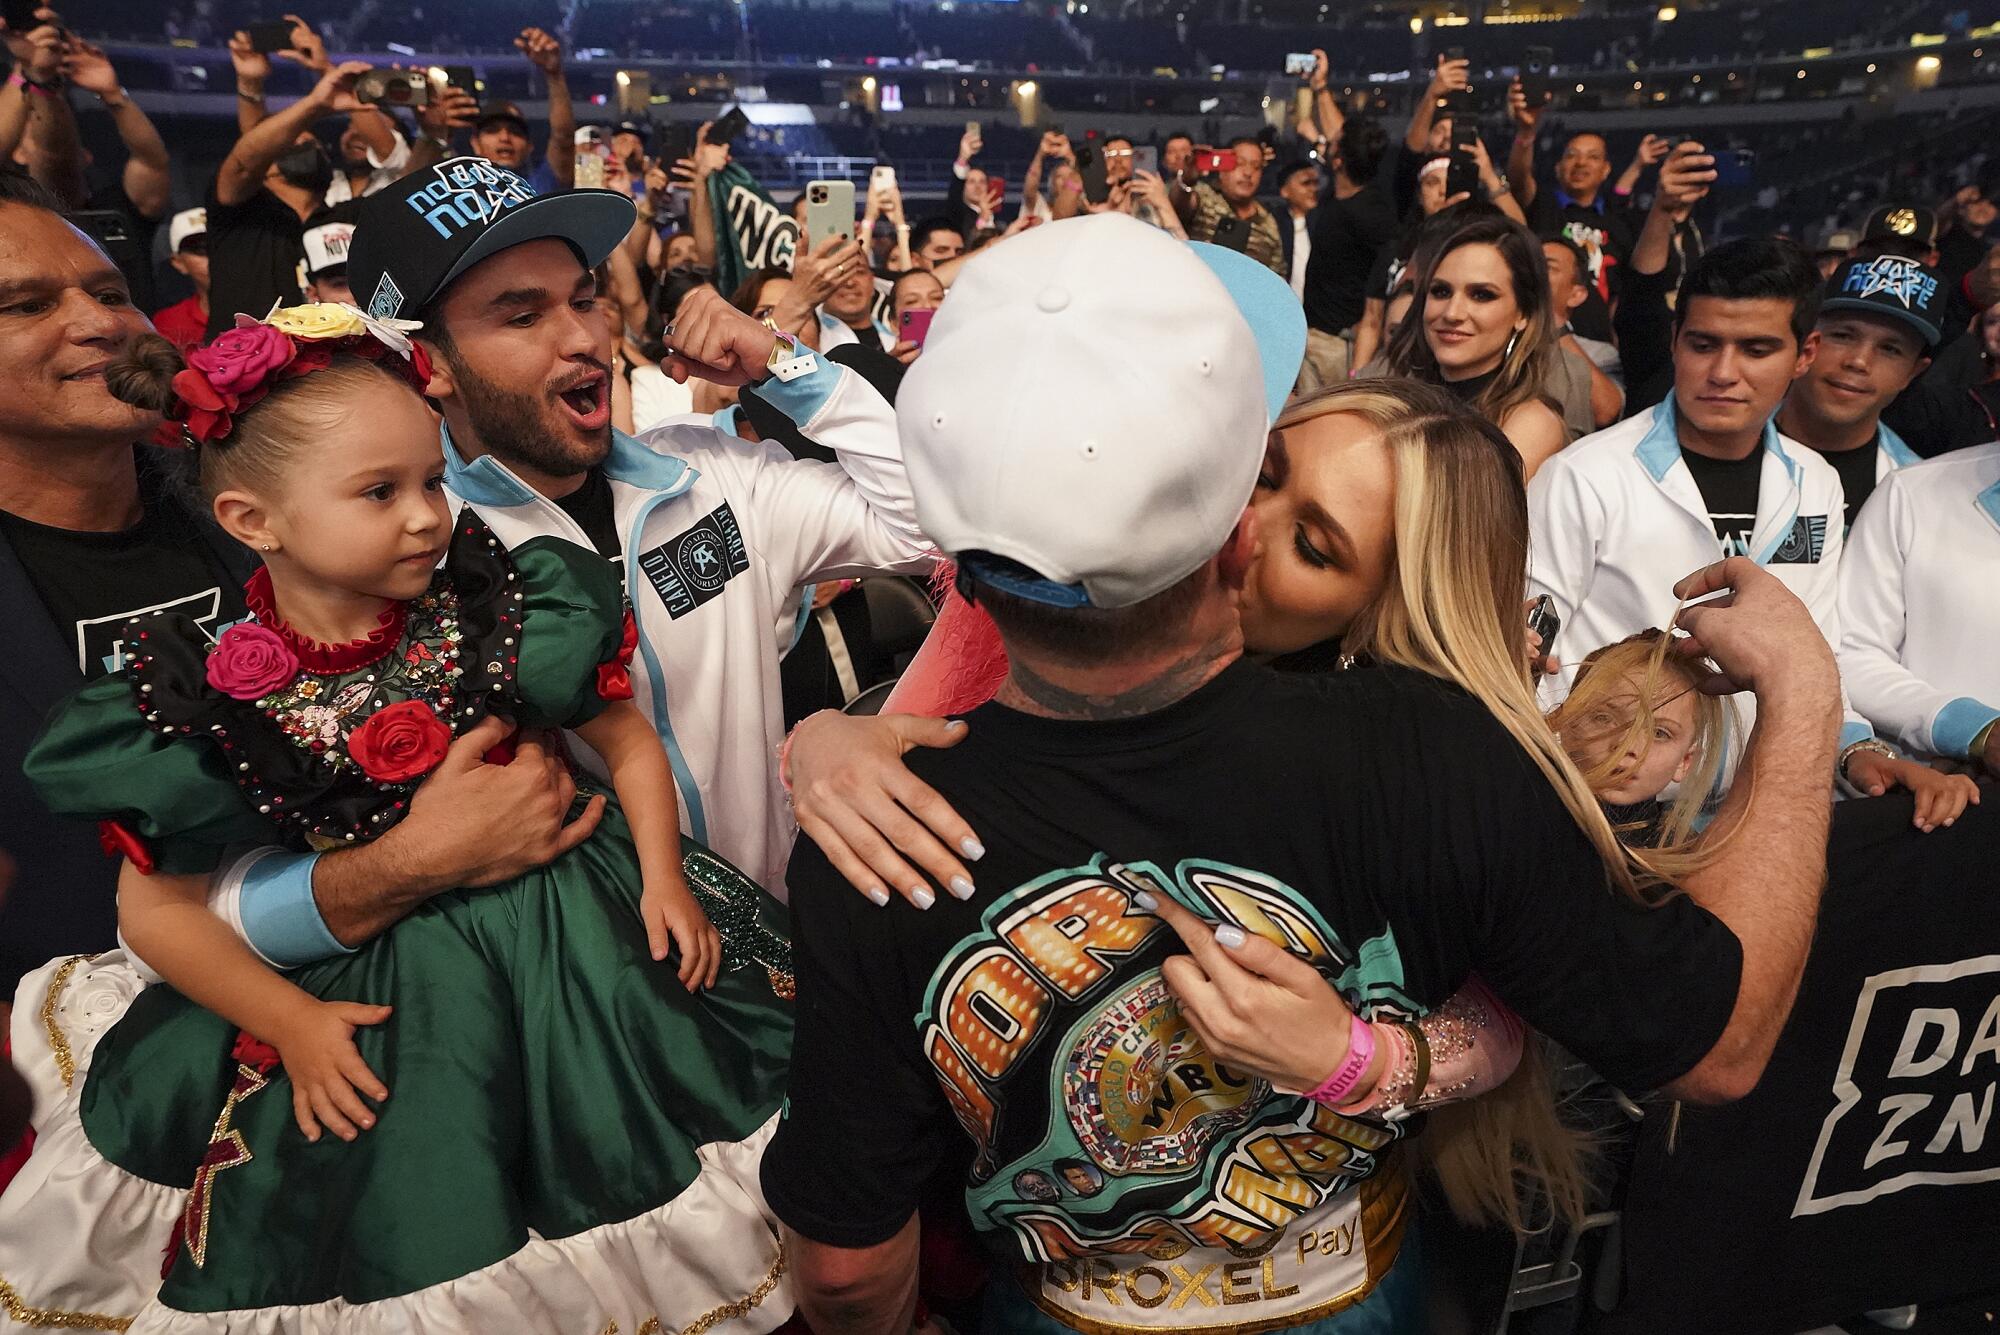 Canelo Álvarez kisses his girlfriend in the crowd as someone holds up a little girl with flowers in her hair